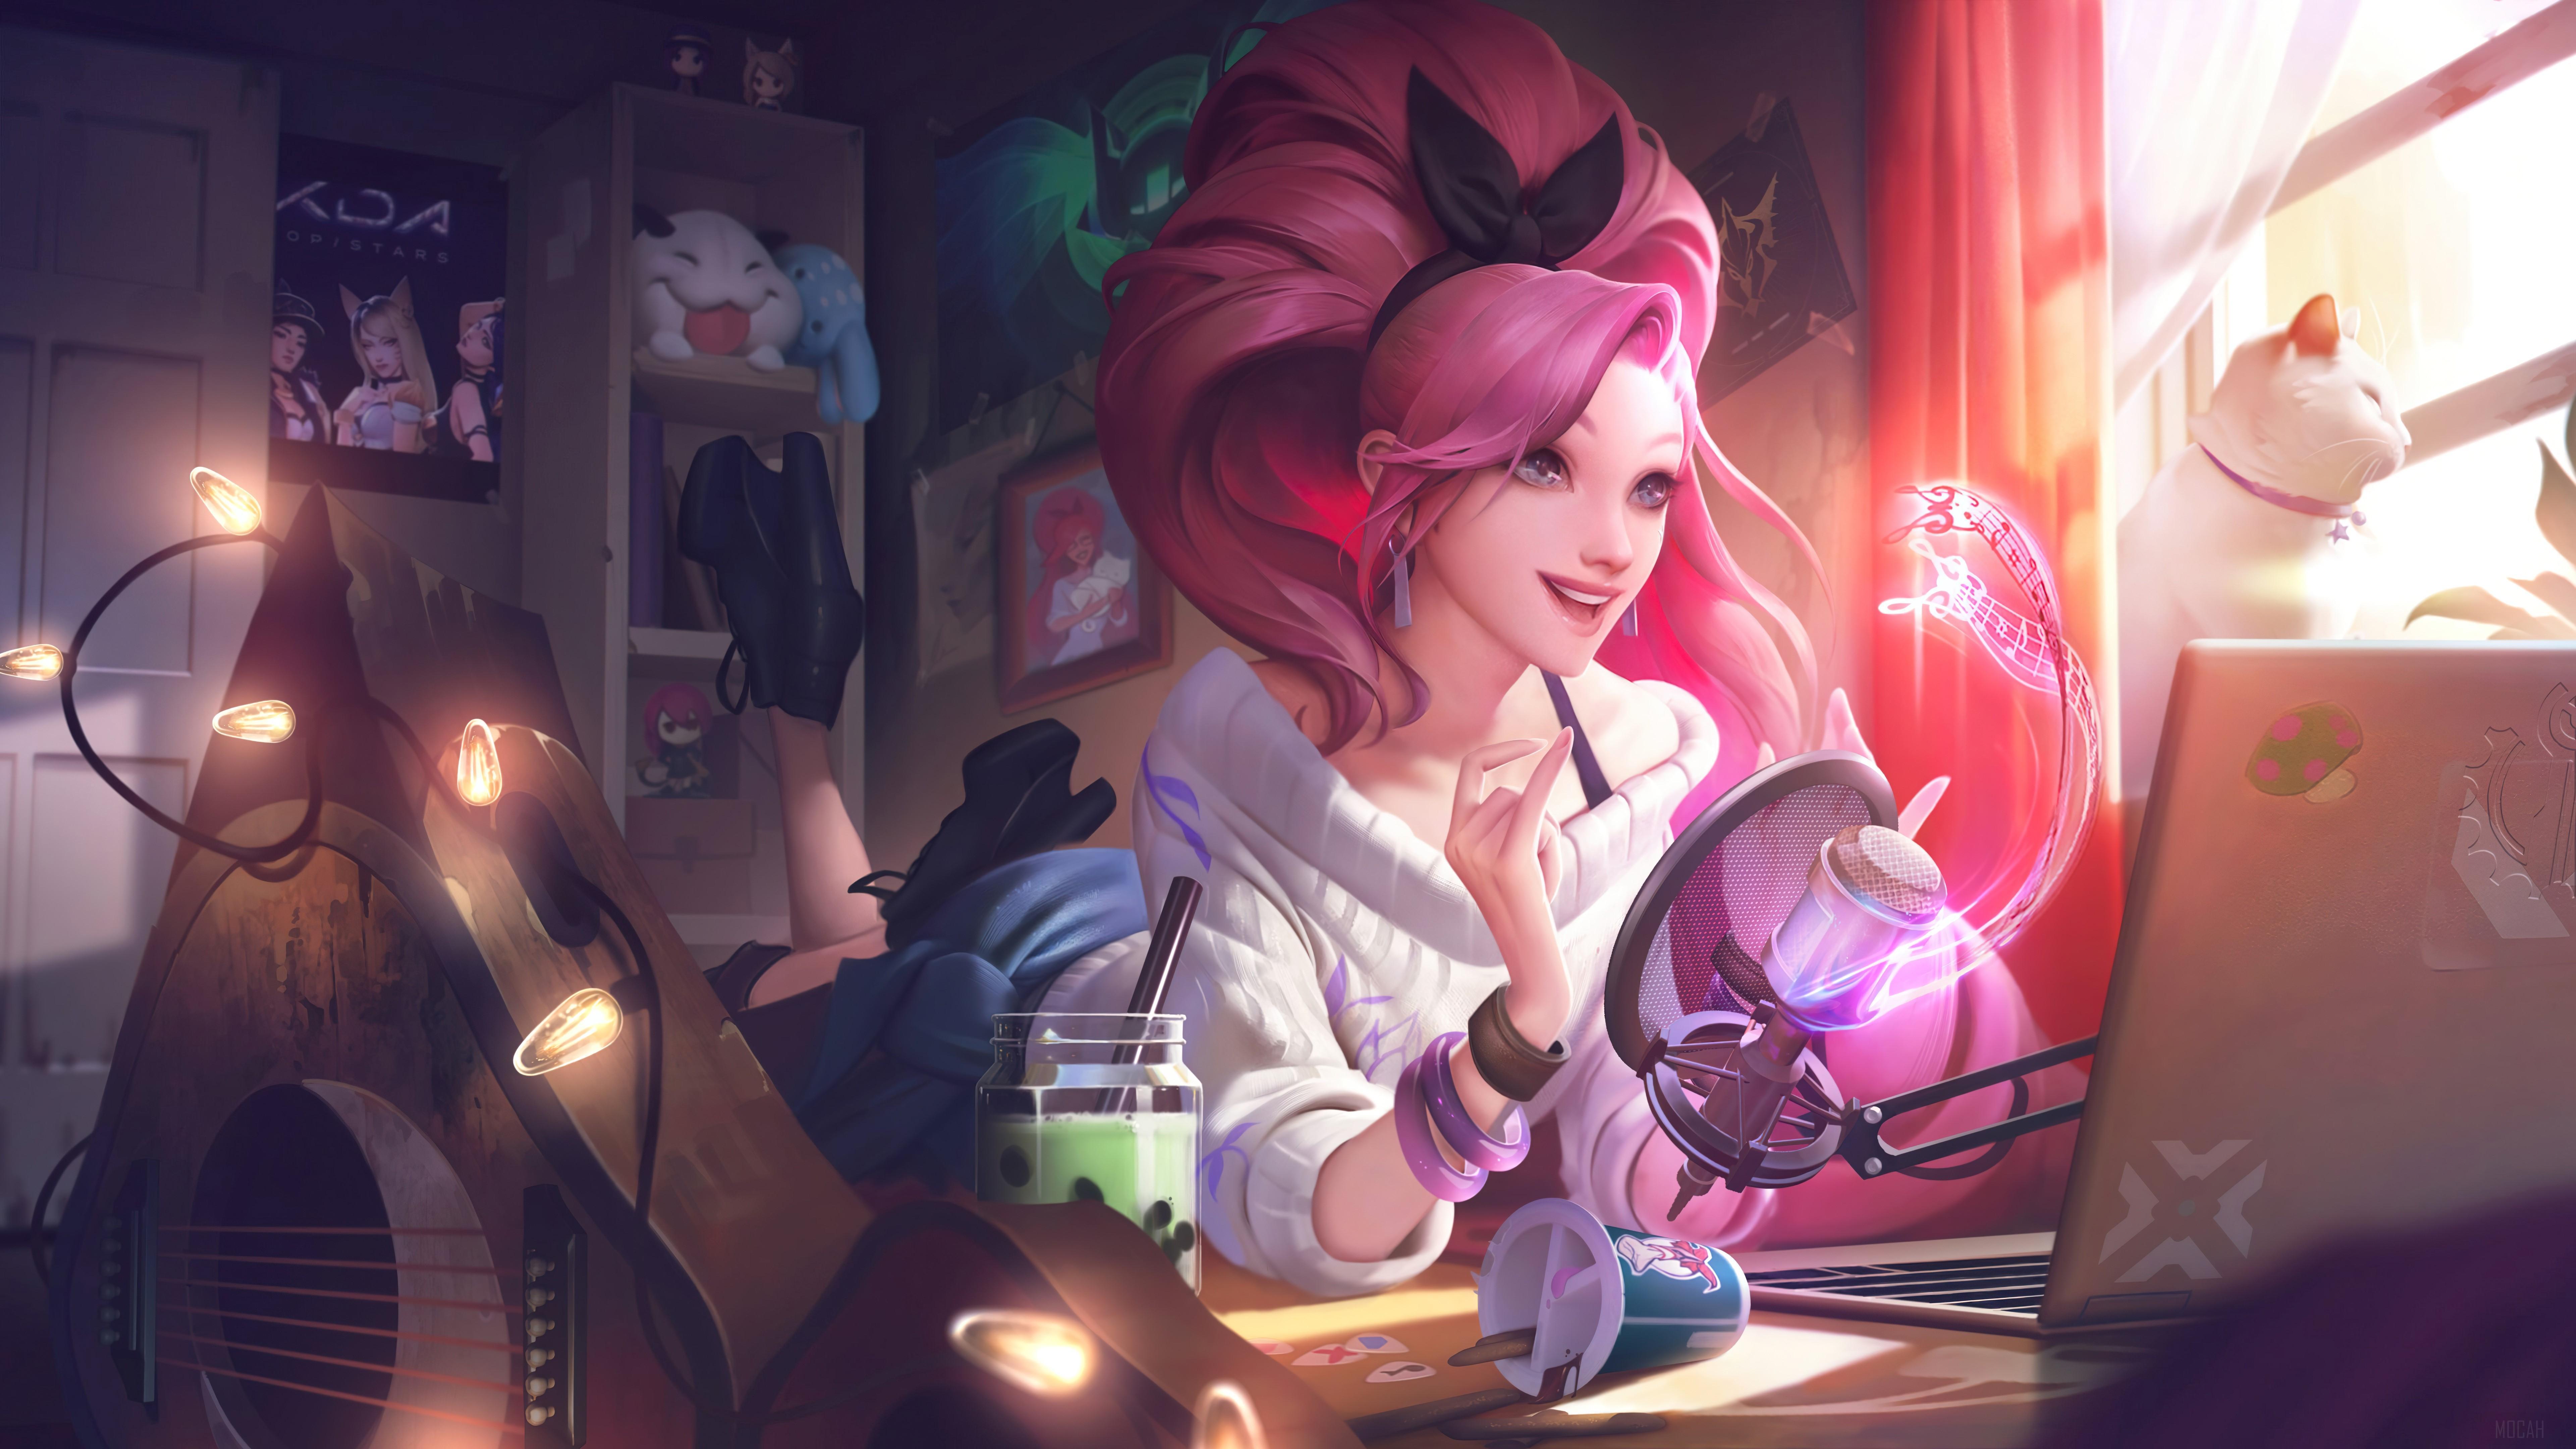 HD wallpaper, Splash Art 4K, All Out, League Of Legends, Kda, Video Game, Lol, Indie, Seraphine